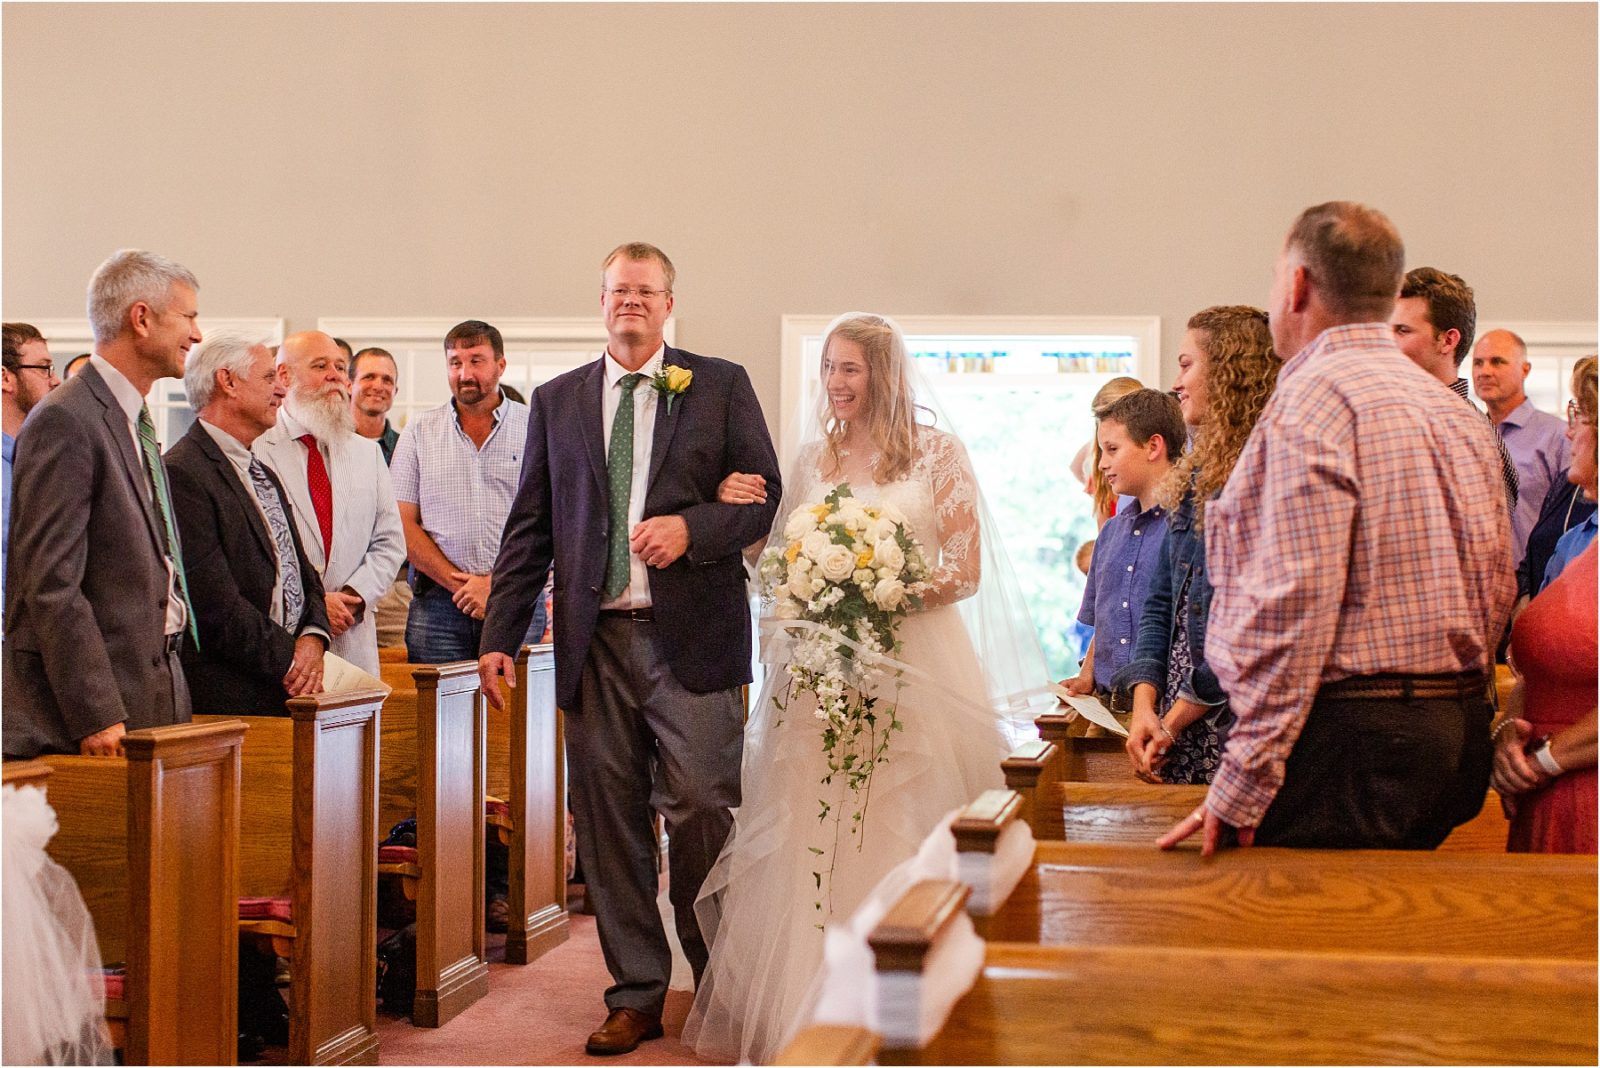 Bride walking with father down church aisle in Georgia